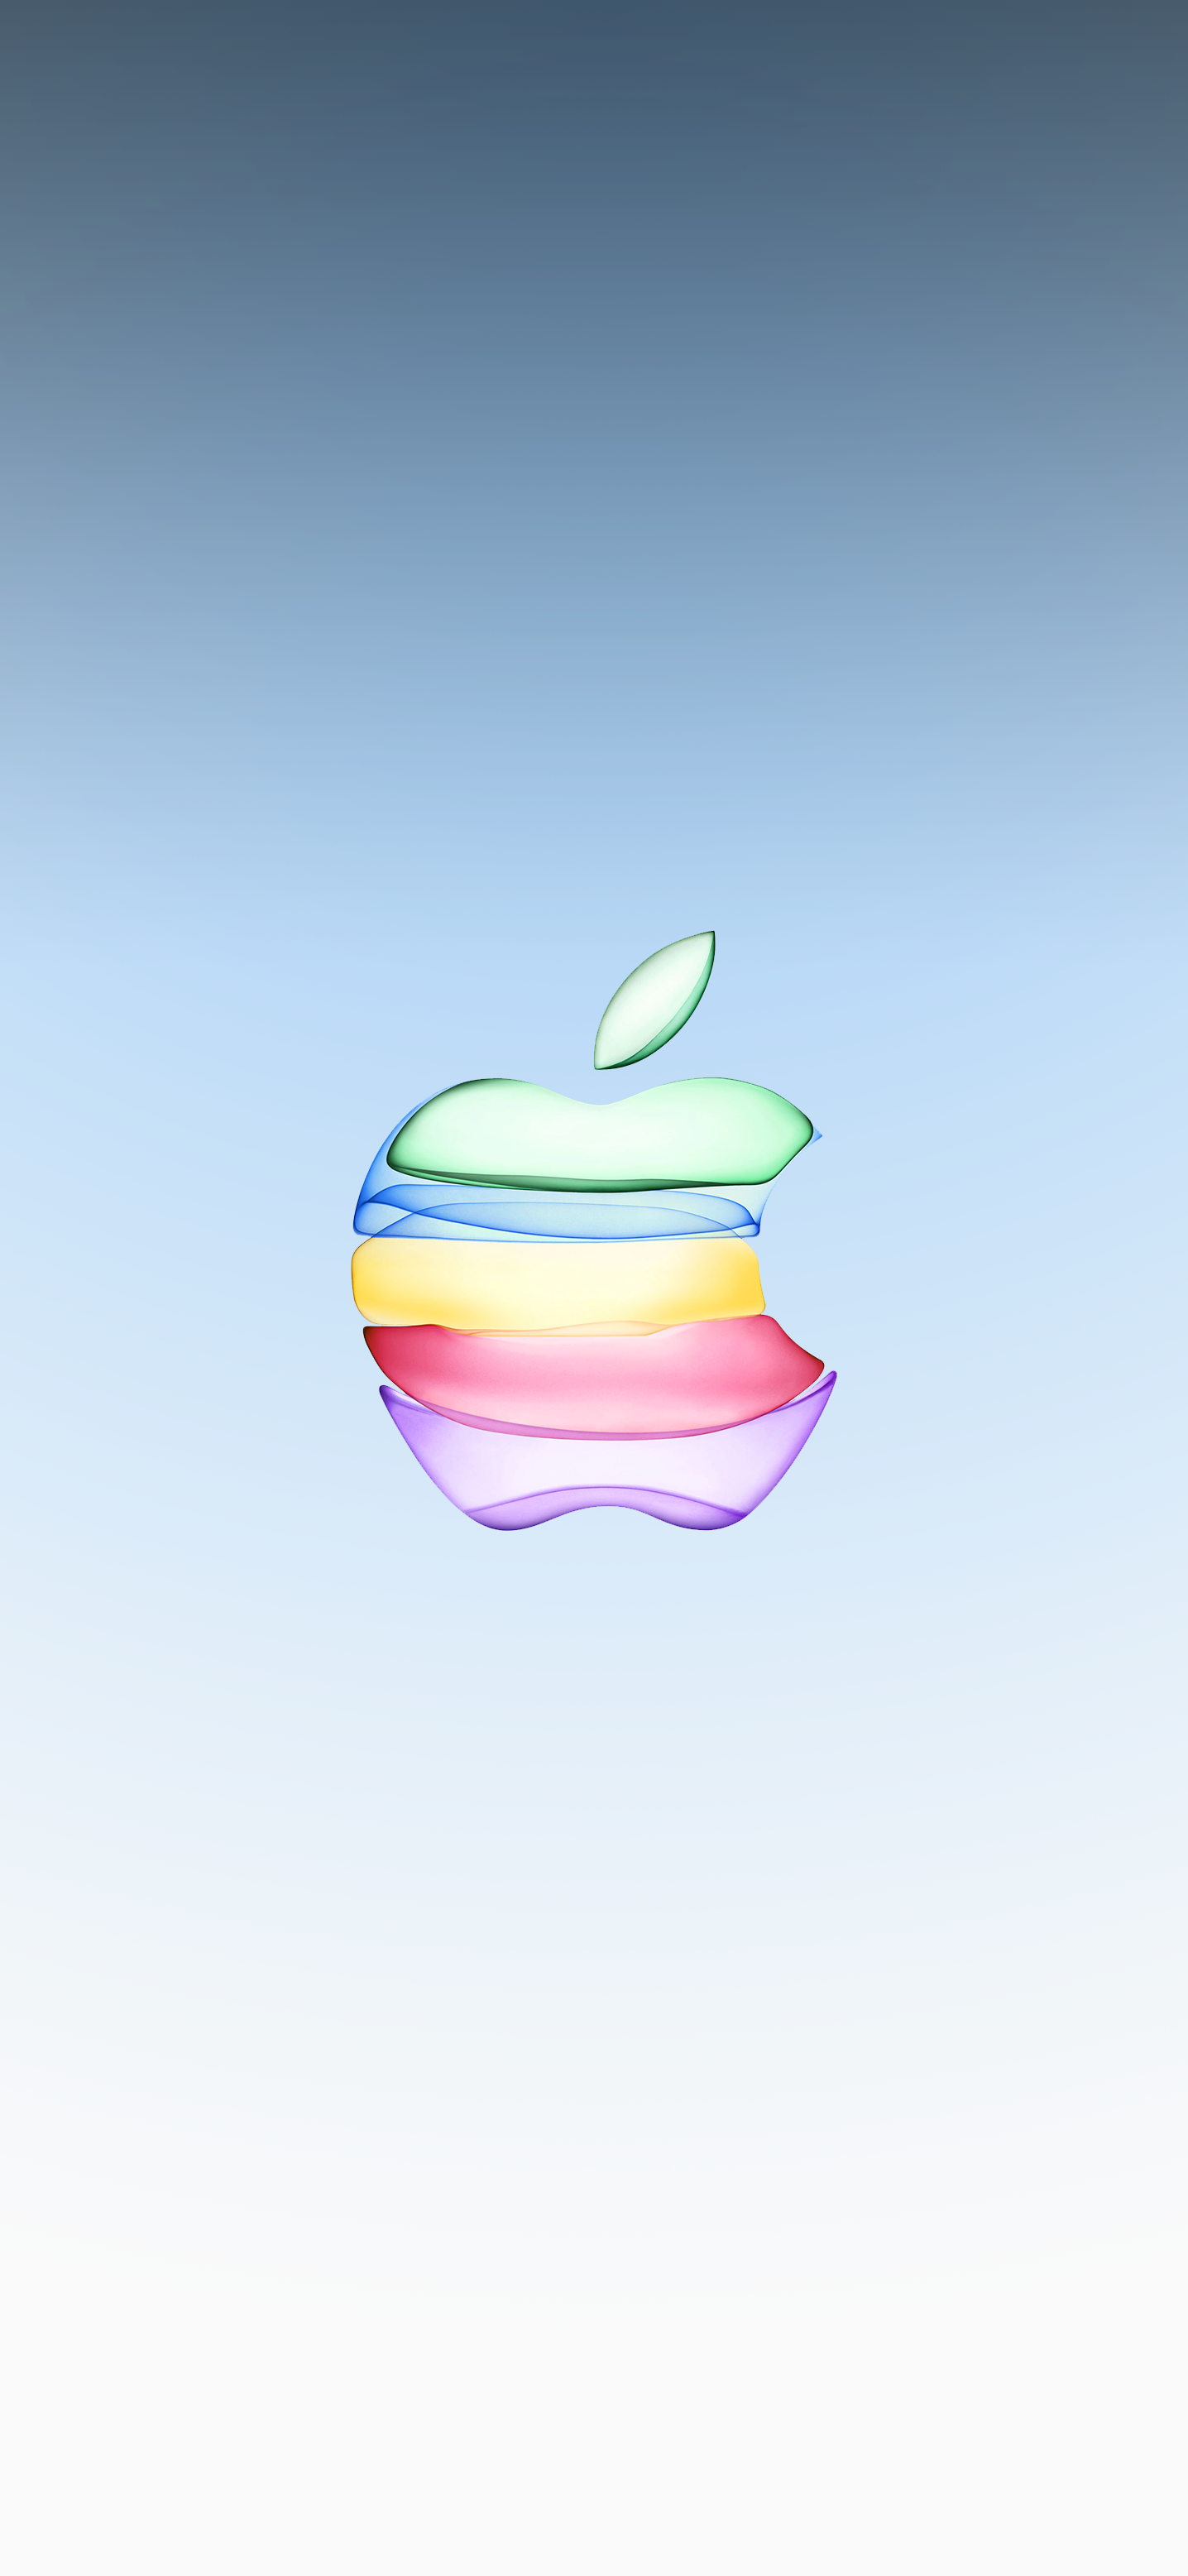 Apple Event Innovation Only Wallpaper